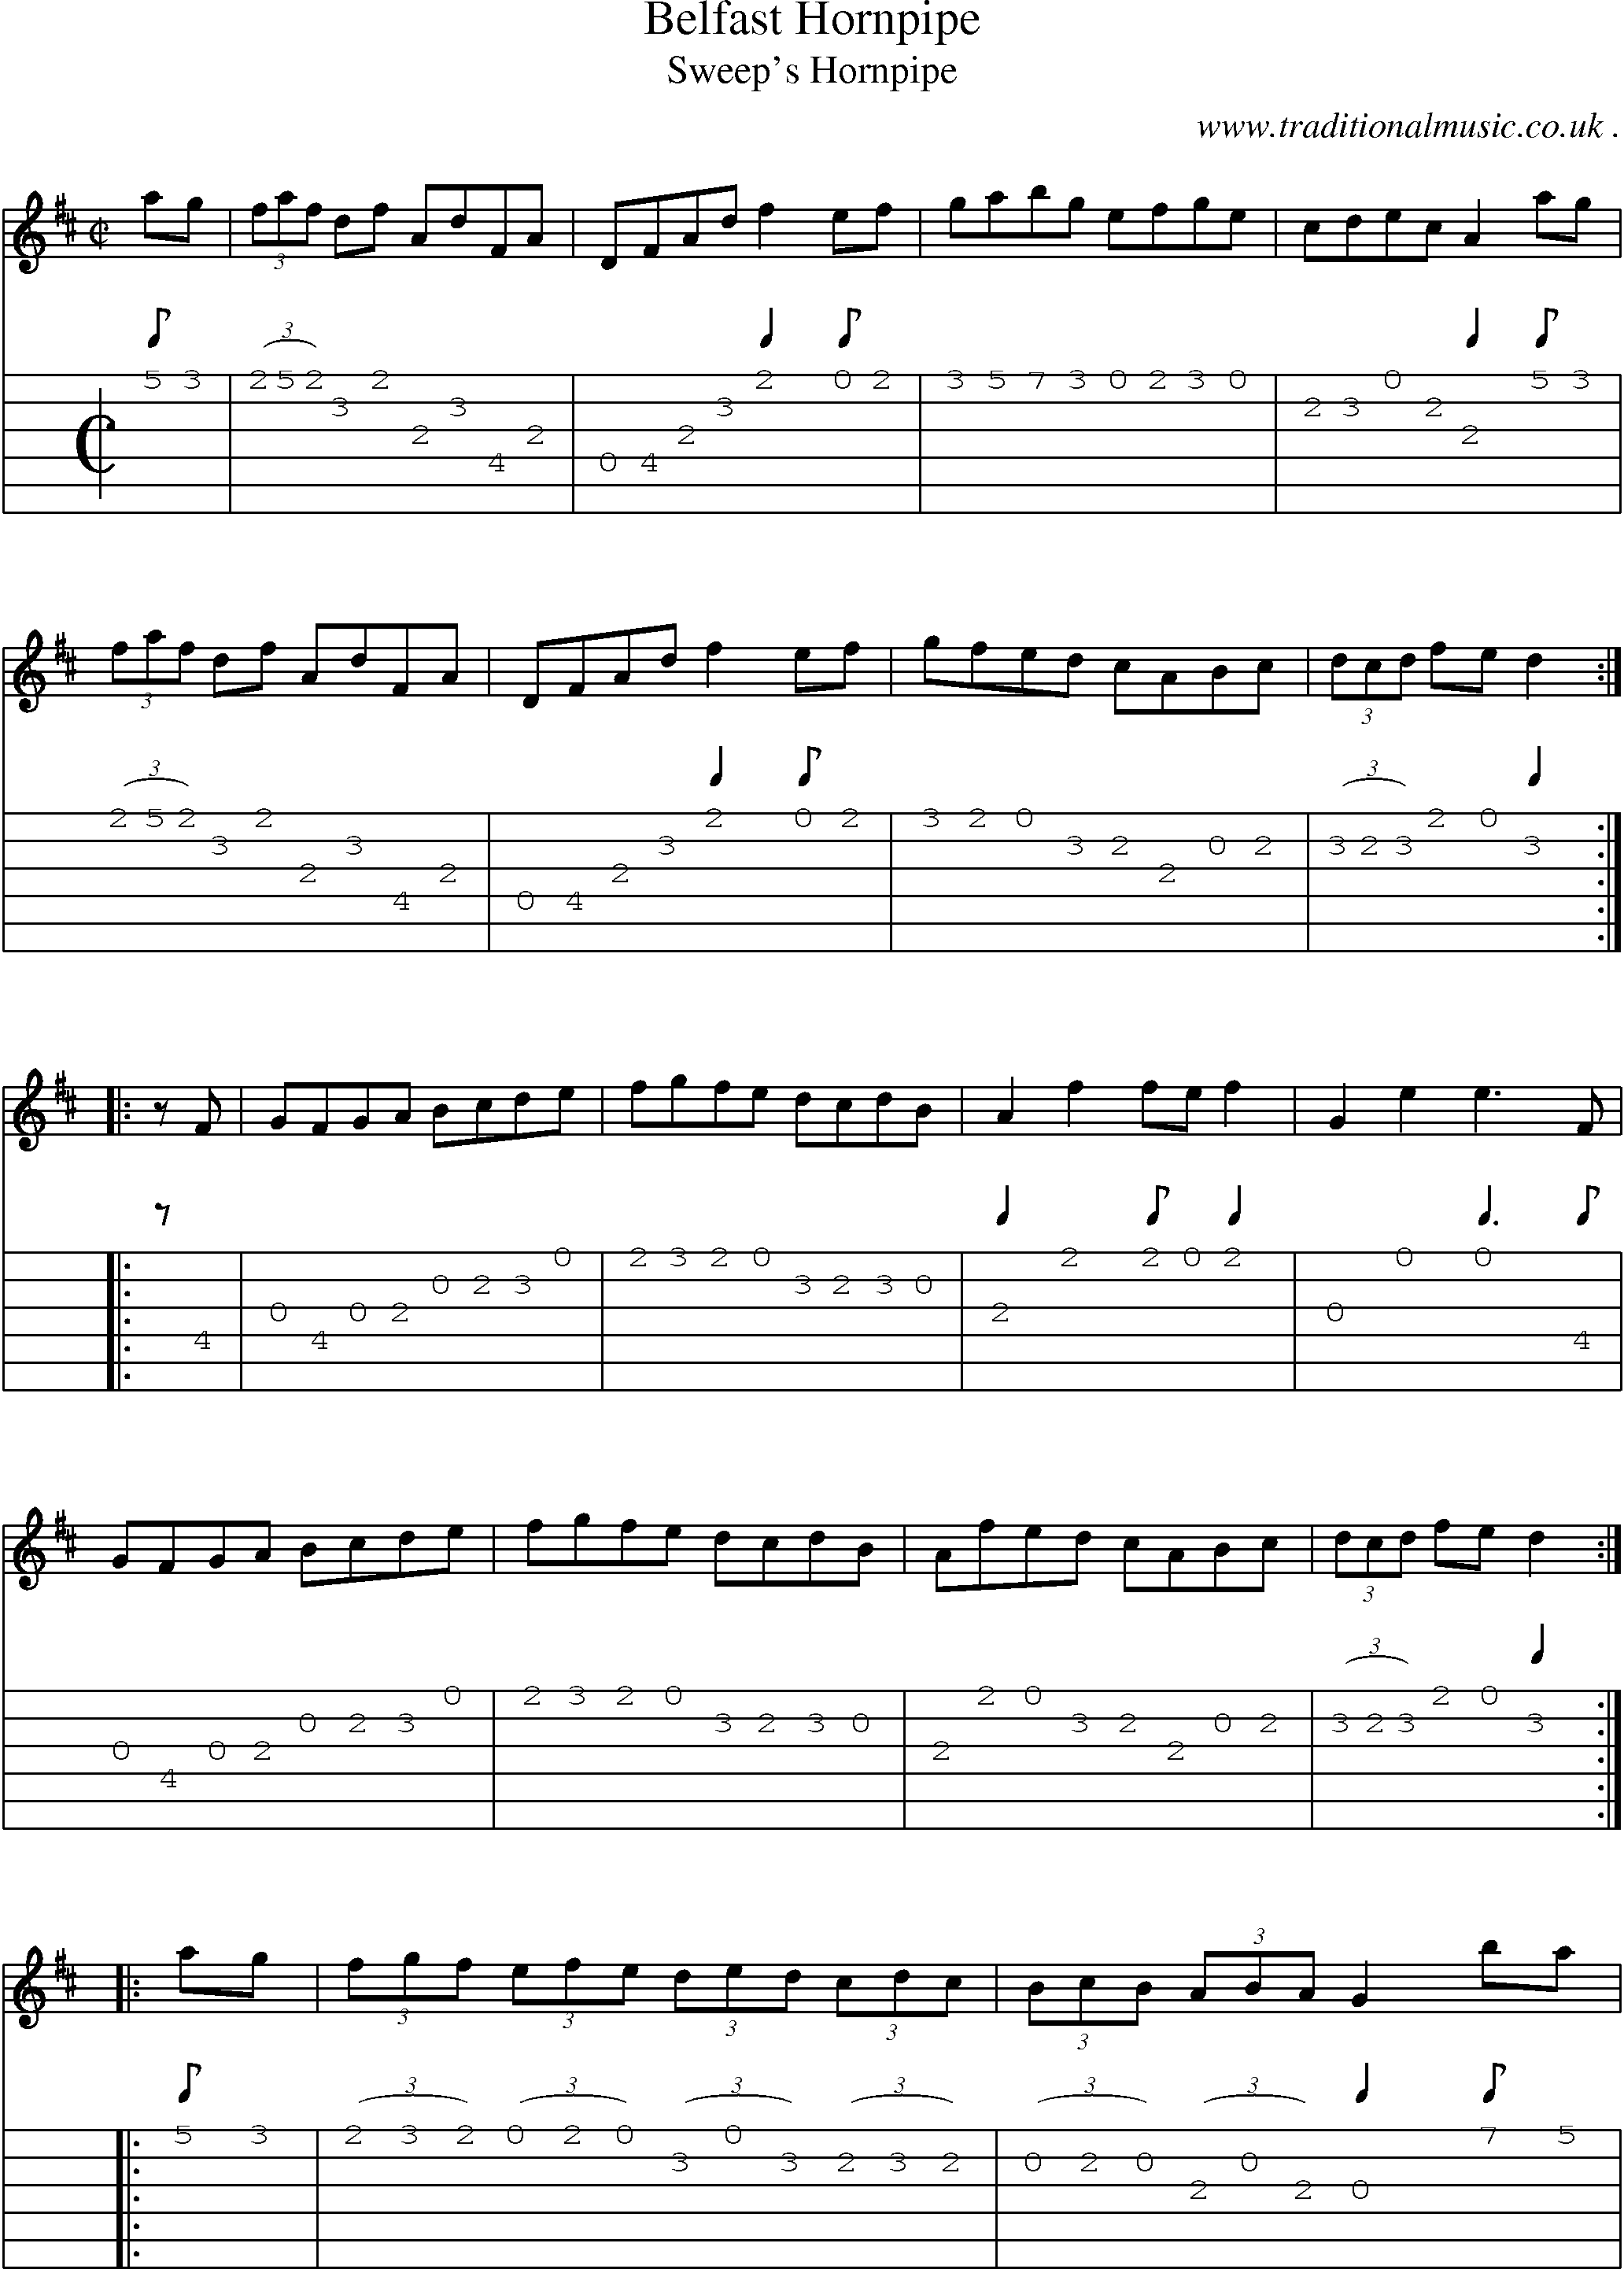 Sheet-Music and Guitar Tabs for Belfast Hornpipe